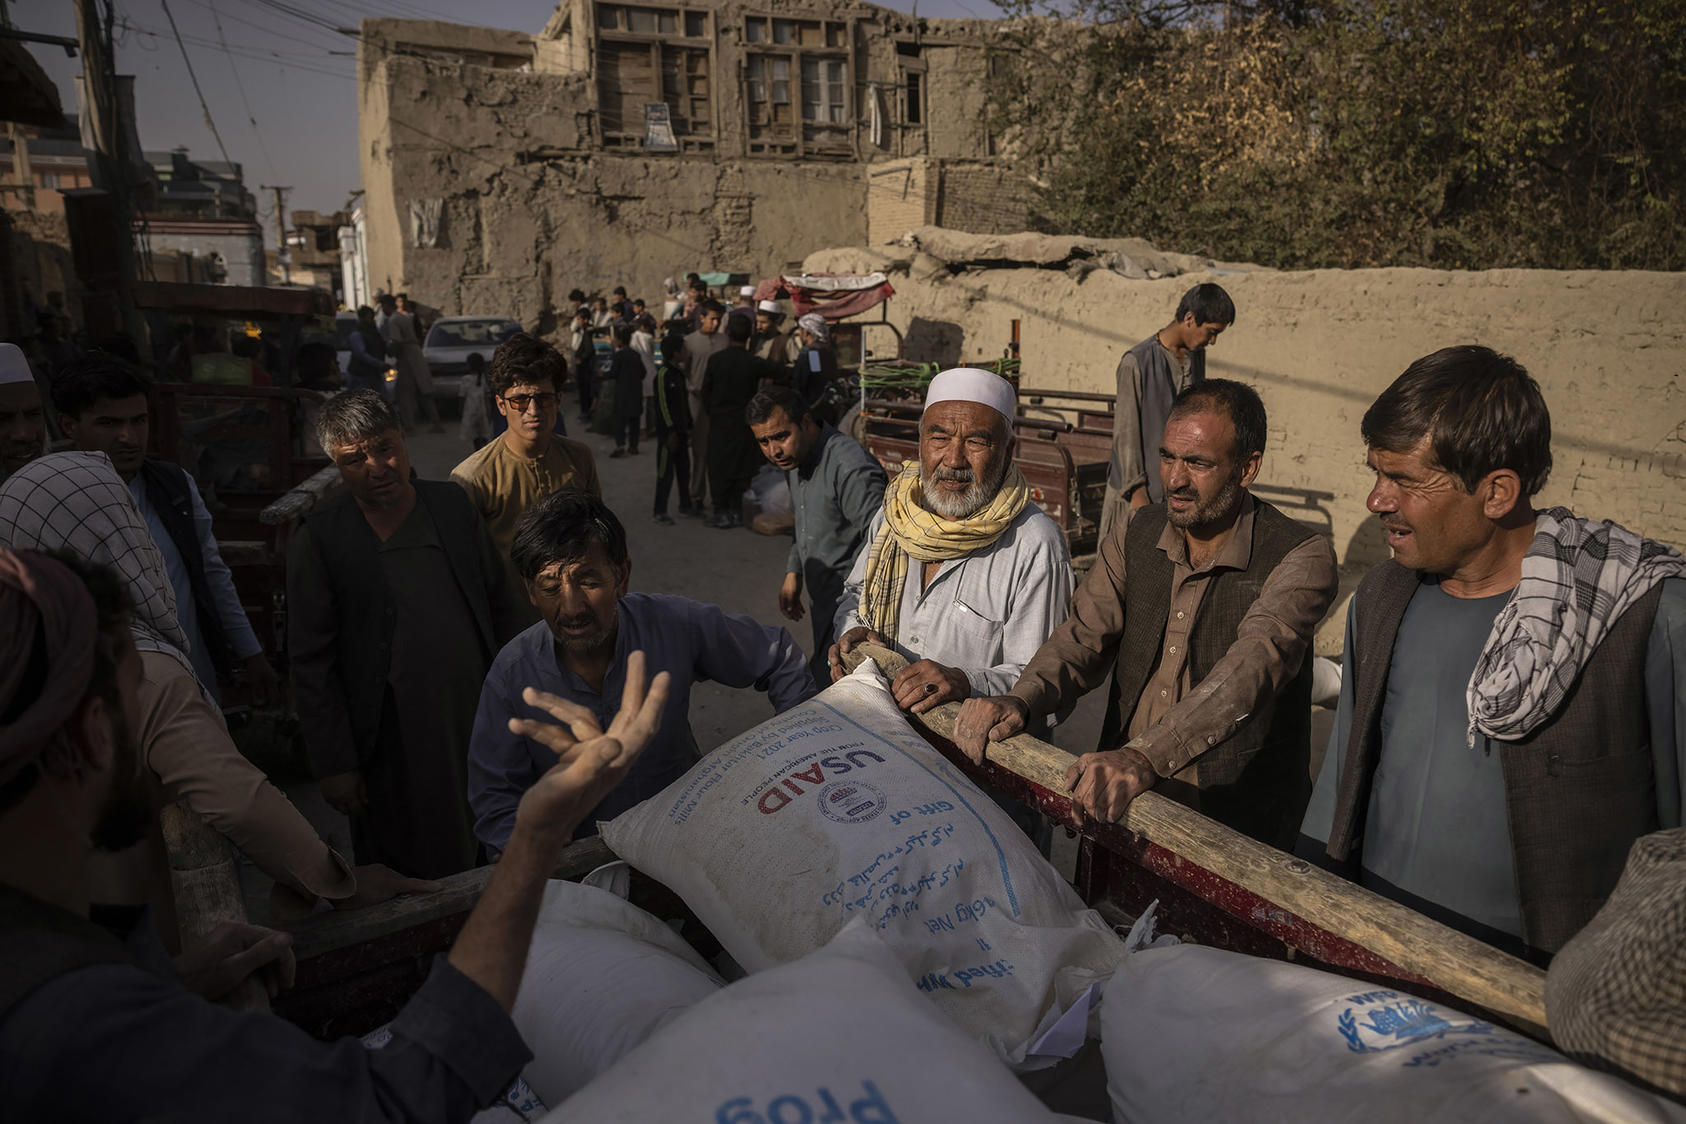 People at a food distribution site in Kabul, Afghanistan. October 7, 2021. (Victor J. Blue/The New York Times)